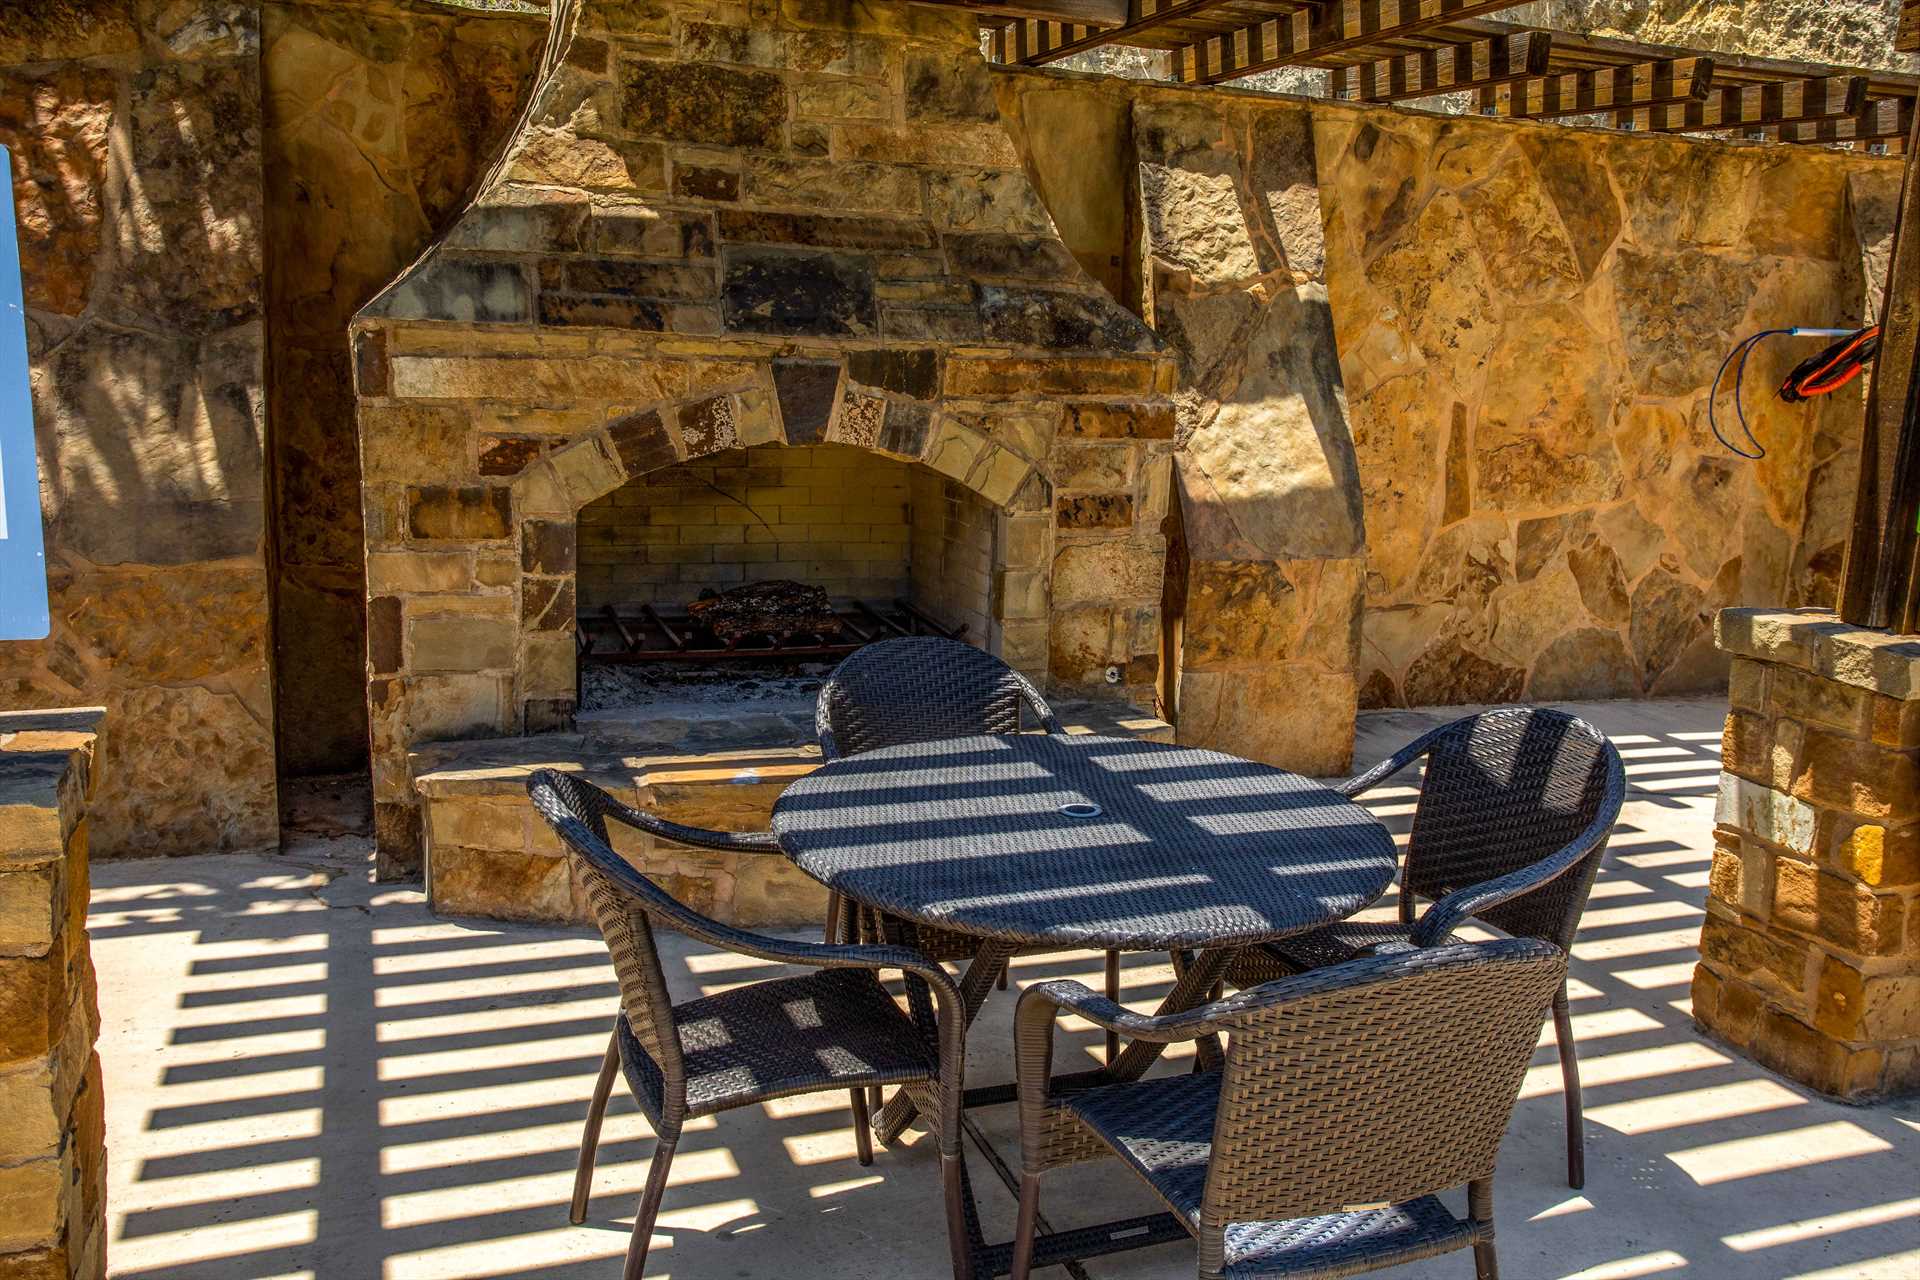                                                 Gather 'round the outdoor fireplace for conversation, snacks, and great company!